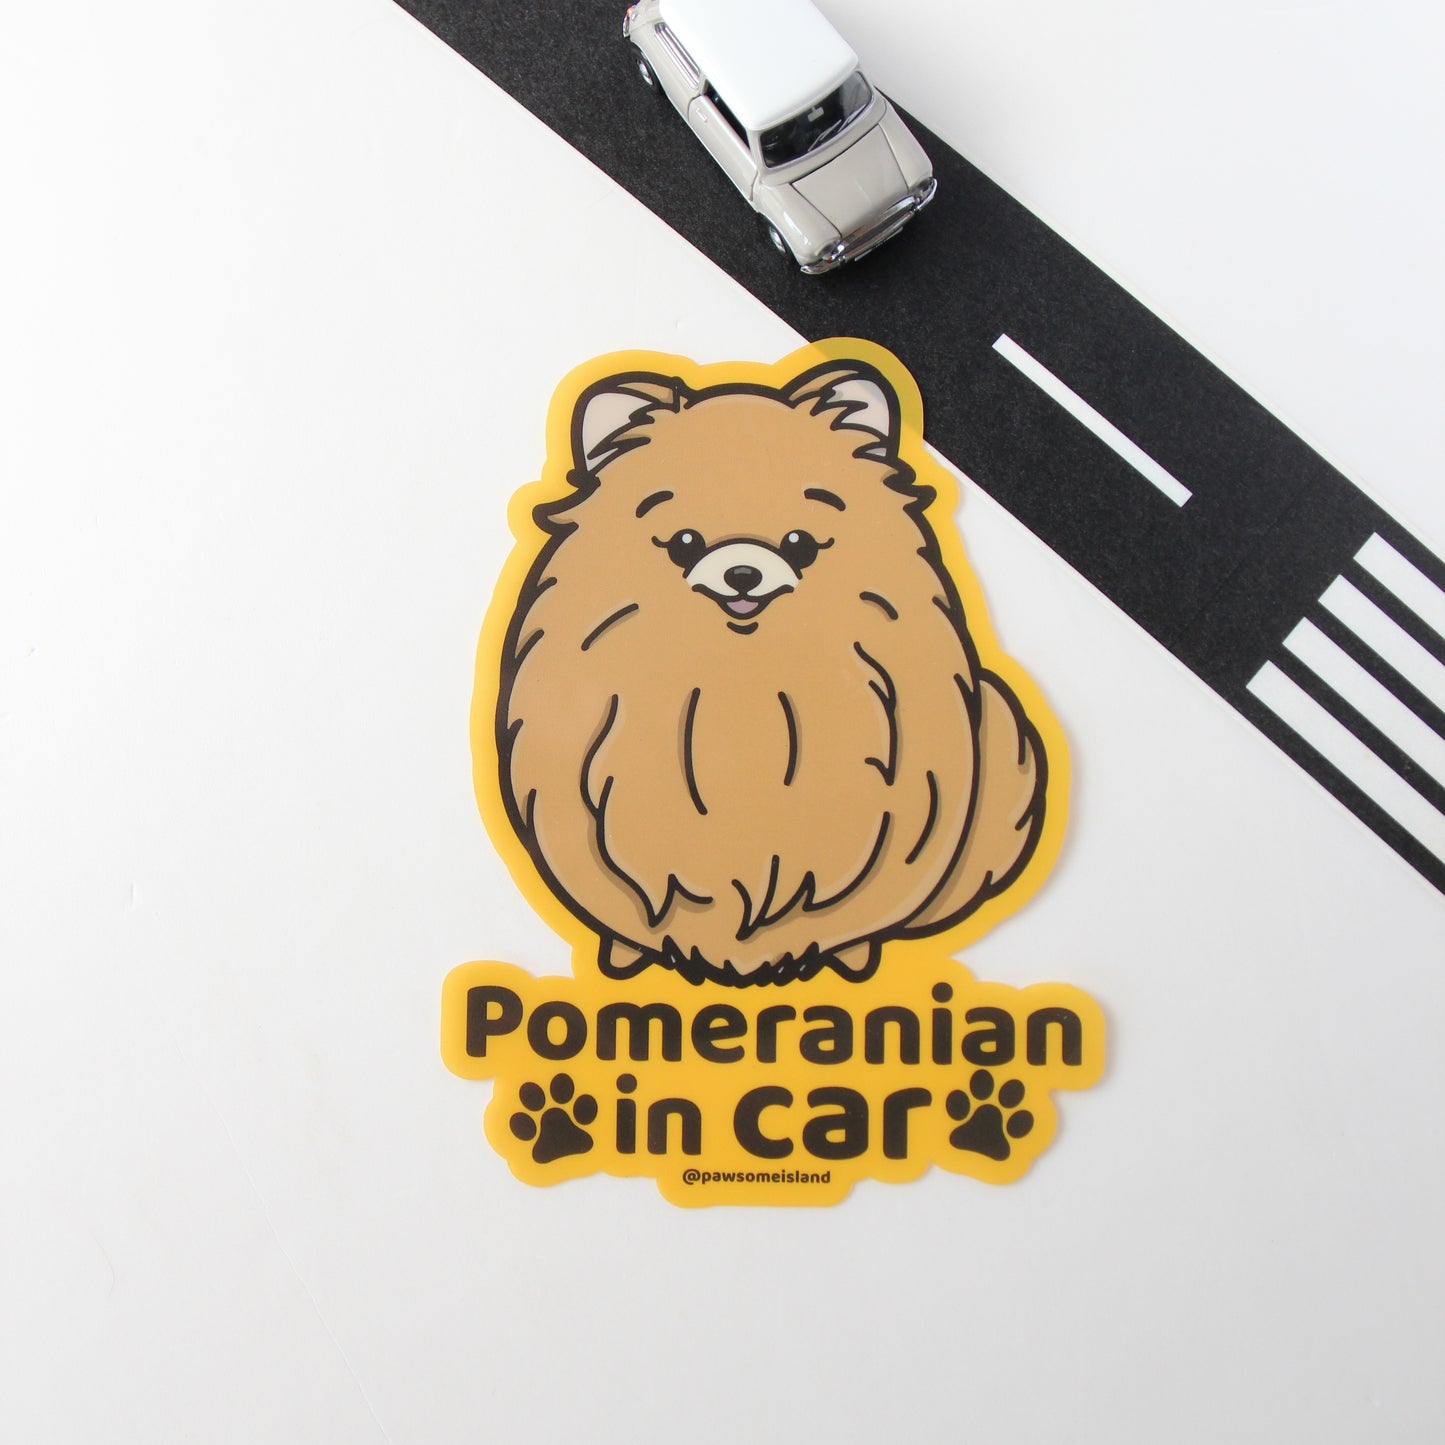 Pomeranian Car Sticker - A Must-Have for Dog Lovers!